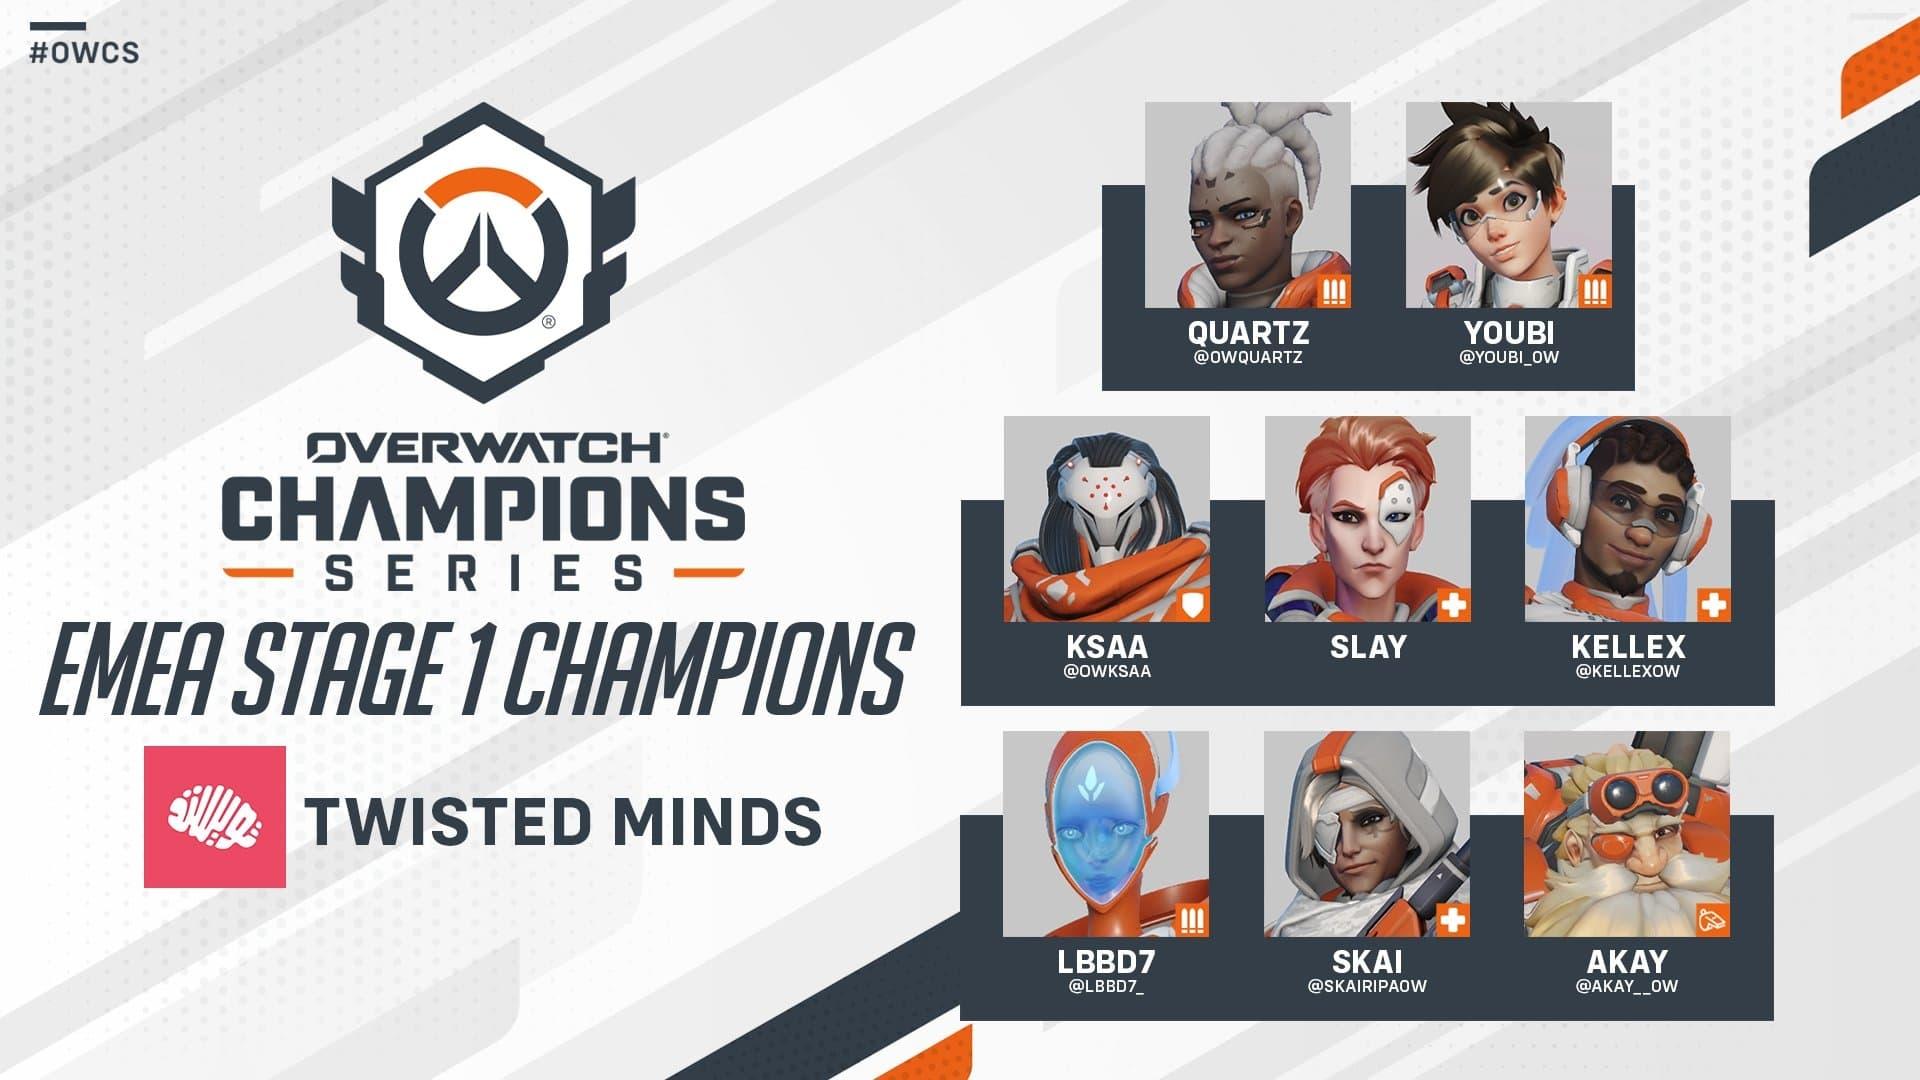 Overwatch Champions Series - Europe, Middle East, and Africa (EMEA) backdrop